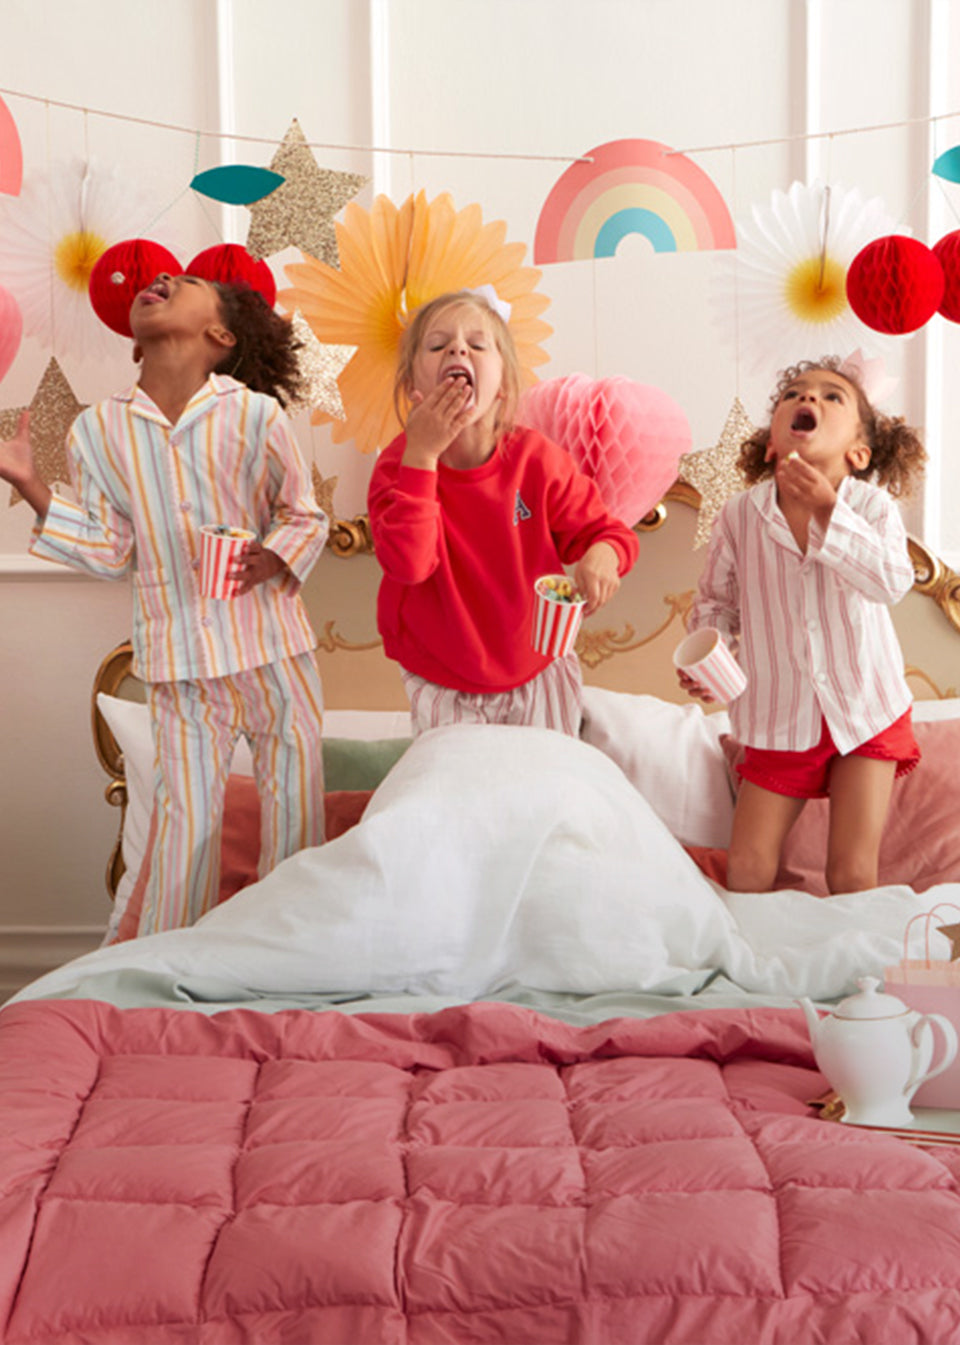 3 young girls stand in their pyjamas atop a bed and eat sweets whilst a pastel honeycomb garland with rainbows and hearts stretches across the wall in the background.